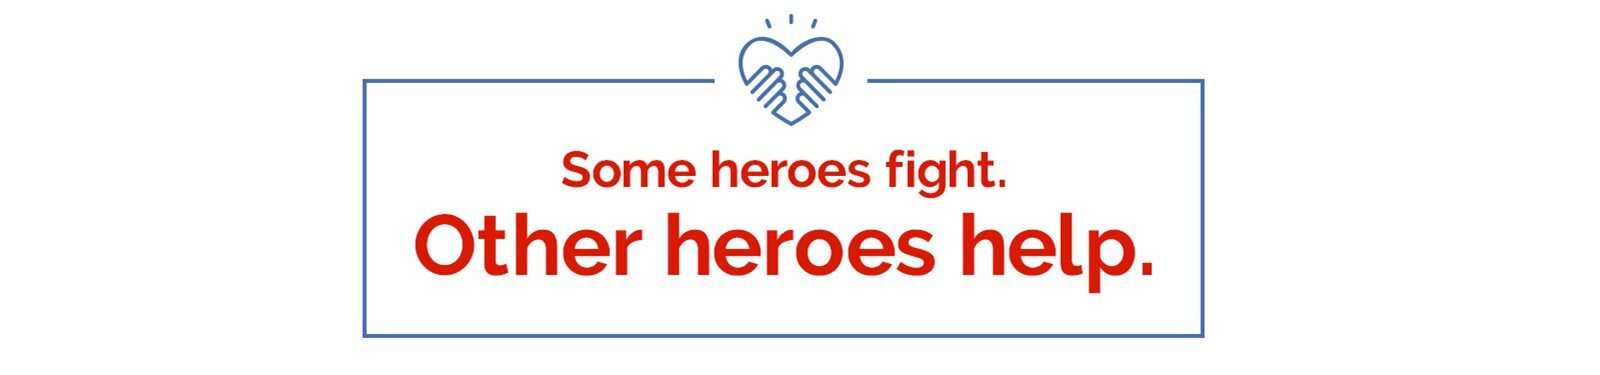 Text that reads "Some heroes fight. Other heroes help."